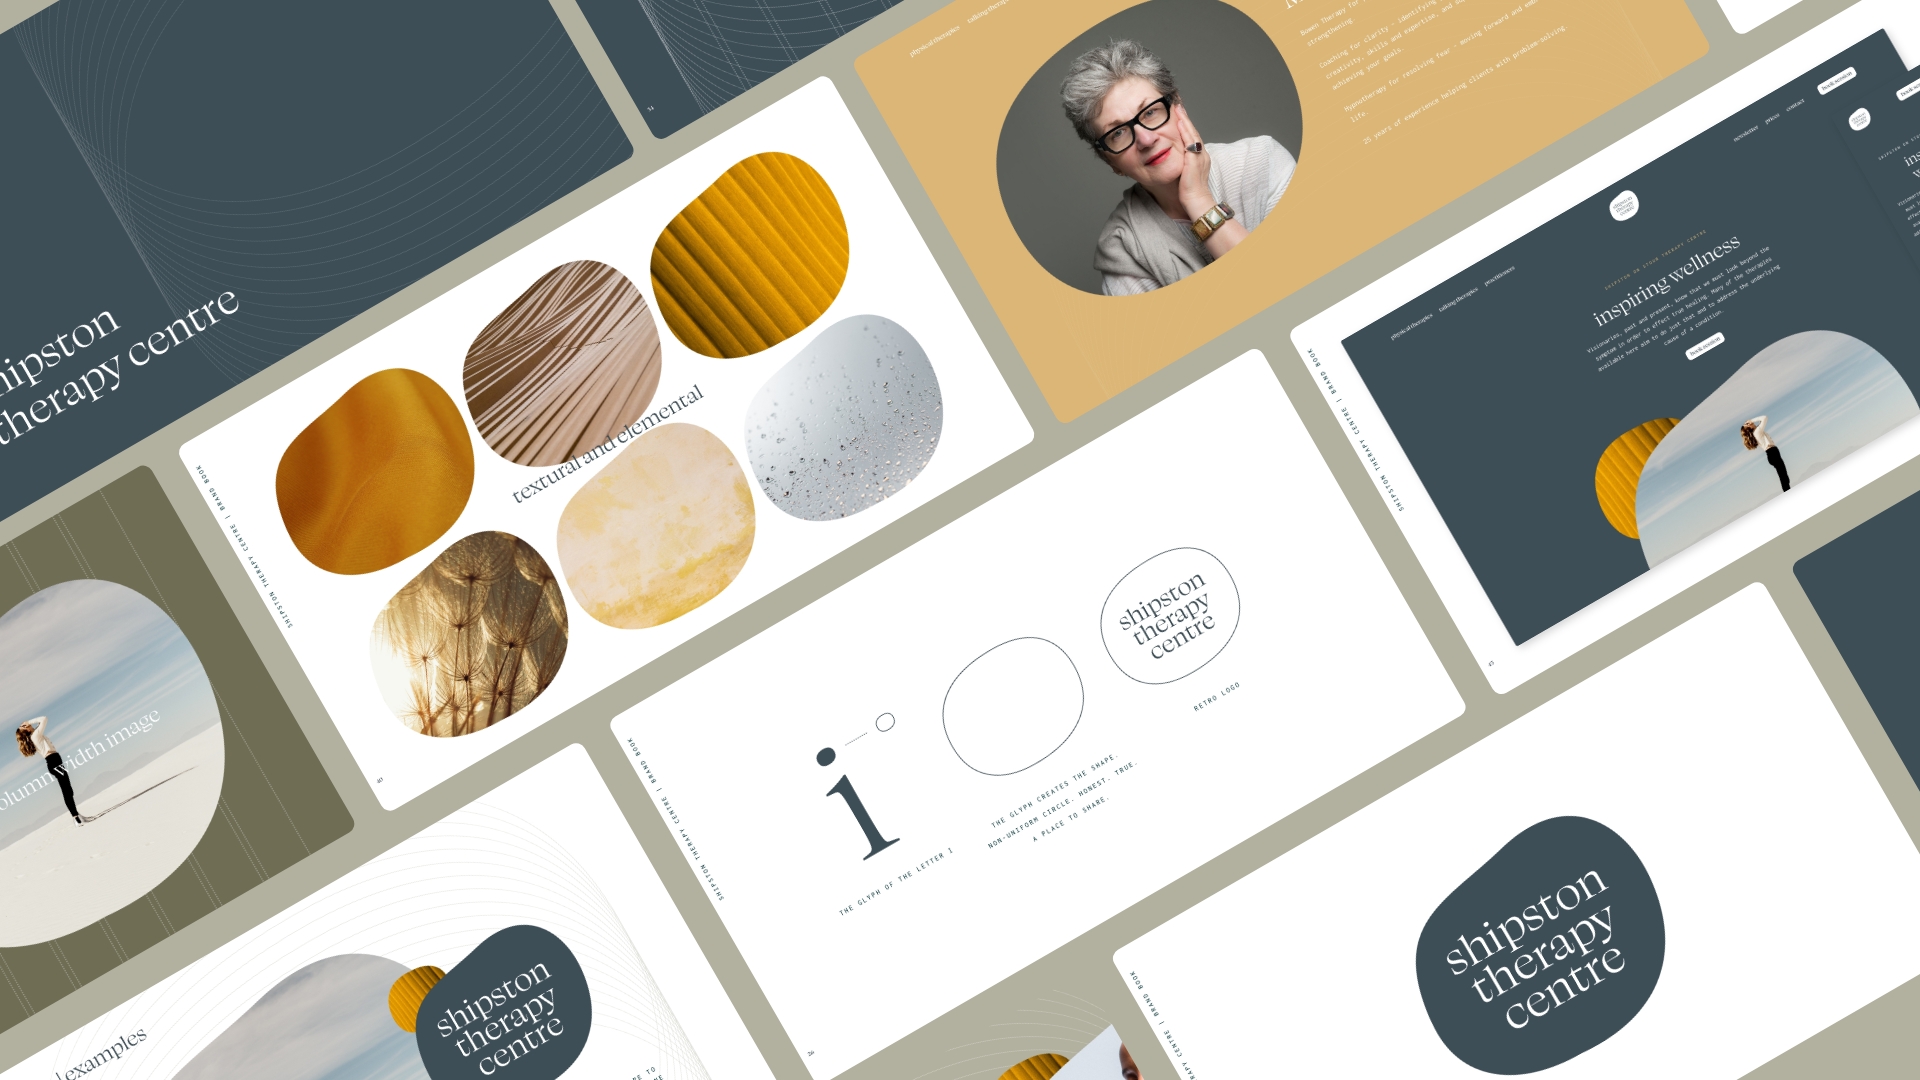 Branding Guidelines for Wellbeing Centre Shipston